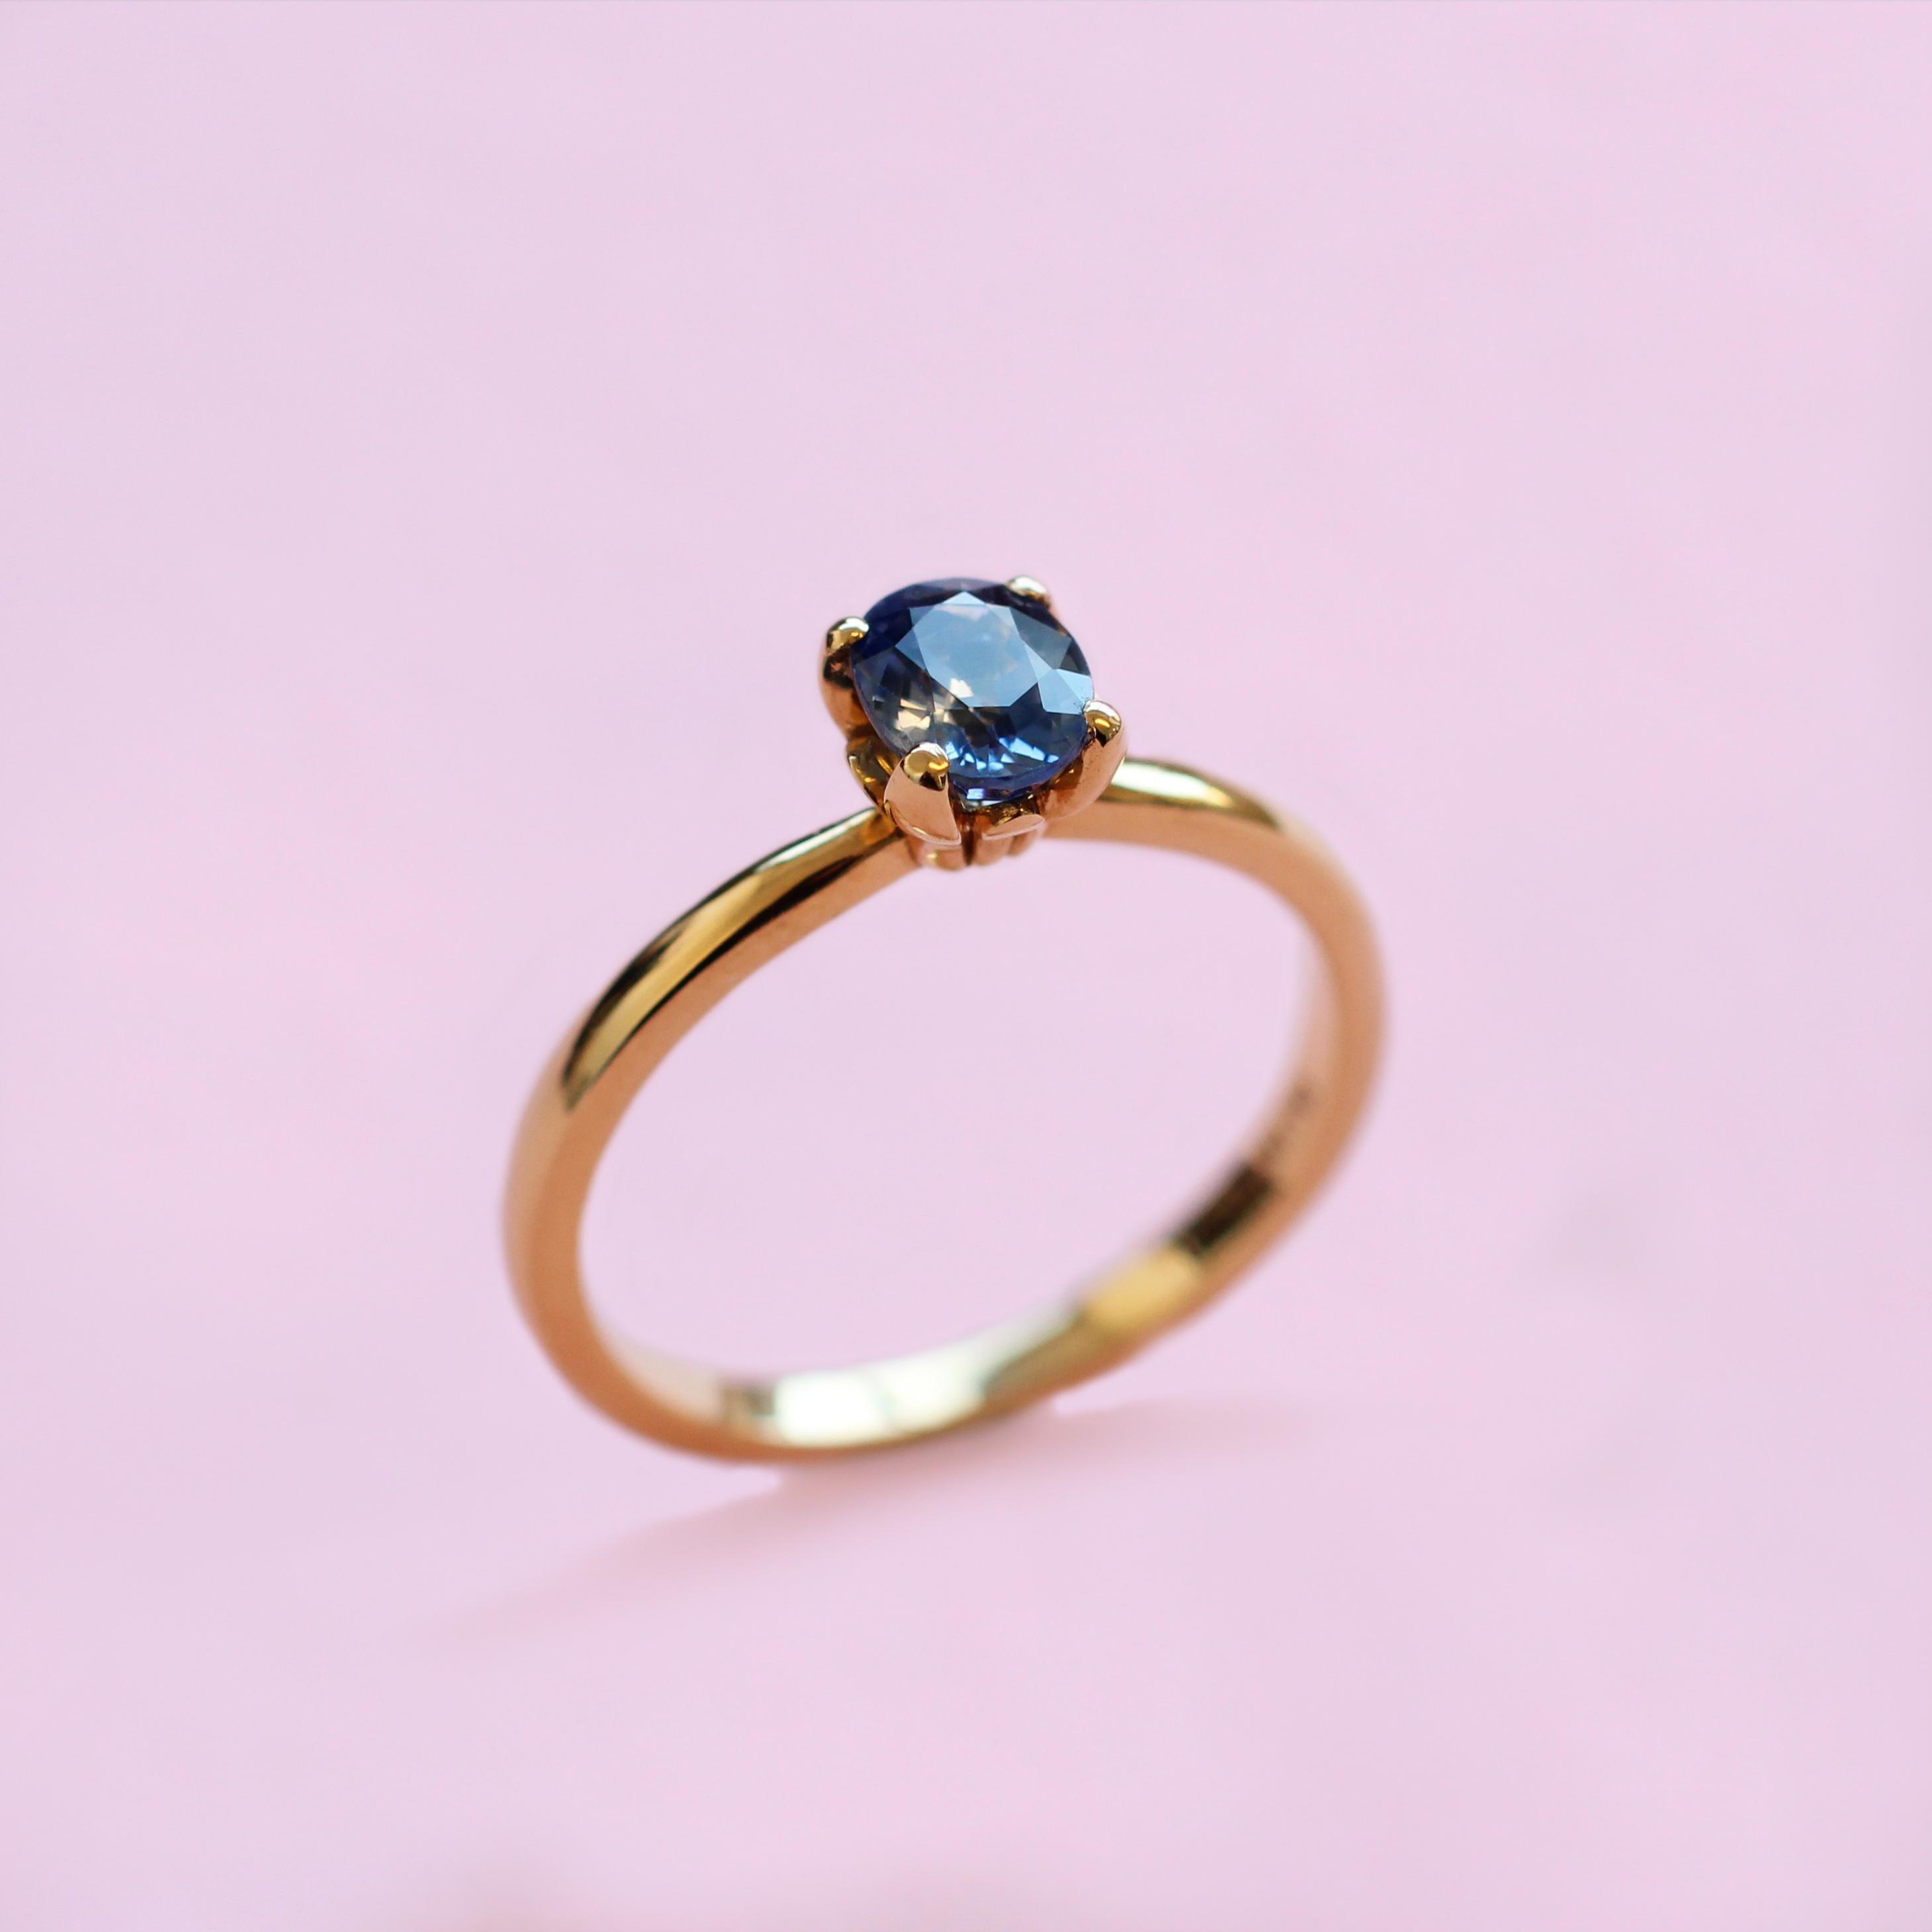 For Sale:  Blue Sapphire Solitaire Ring in 18 Karat Yellow Gold 3